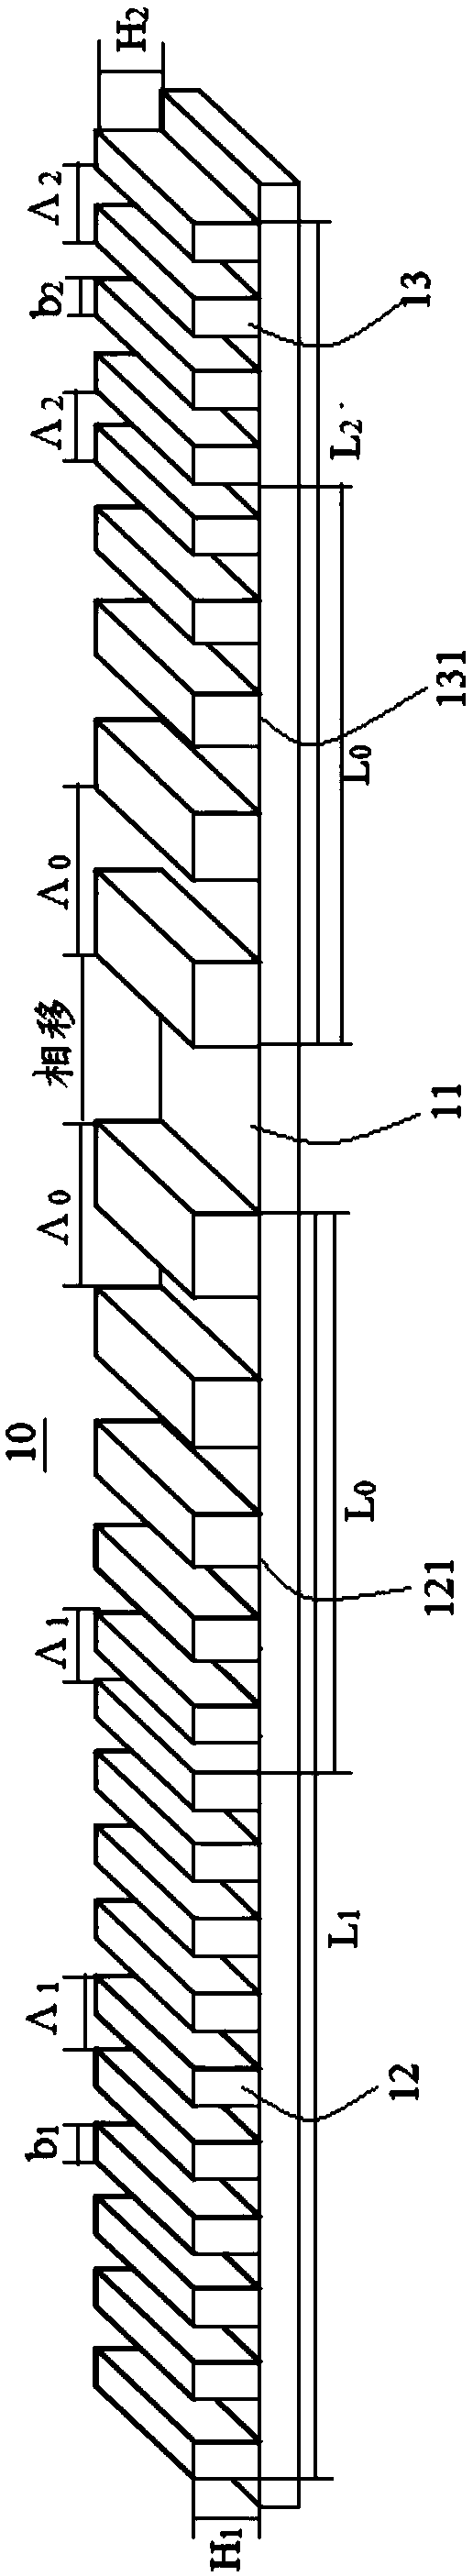 Asymmetrically-structured phase-shifting grating and DFB (distributed feedback) semiconductor laser